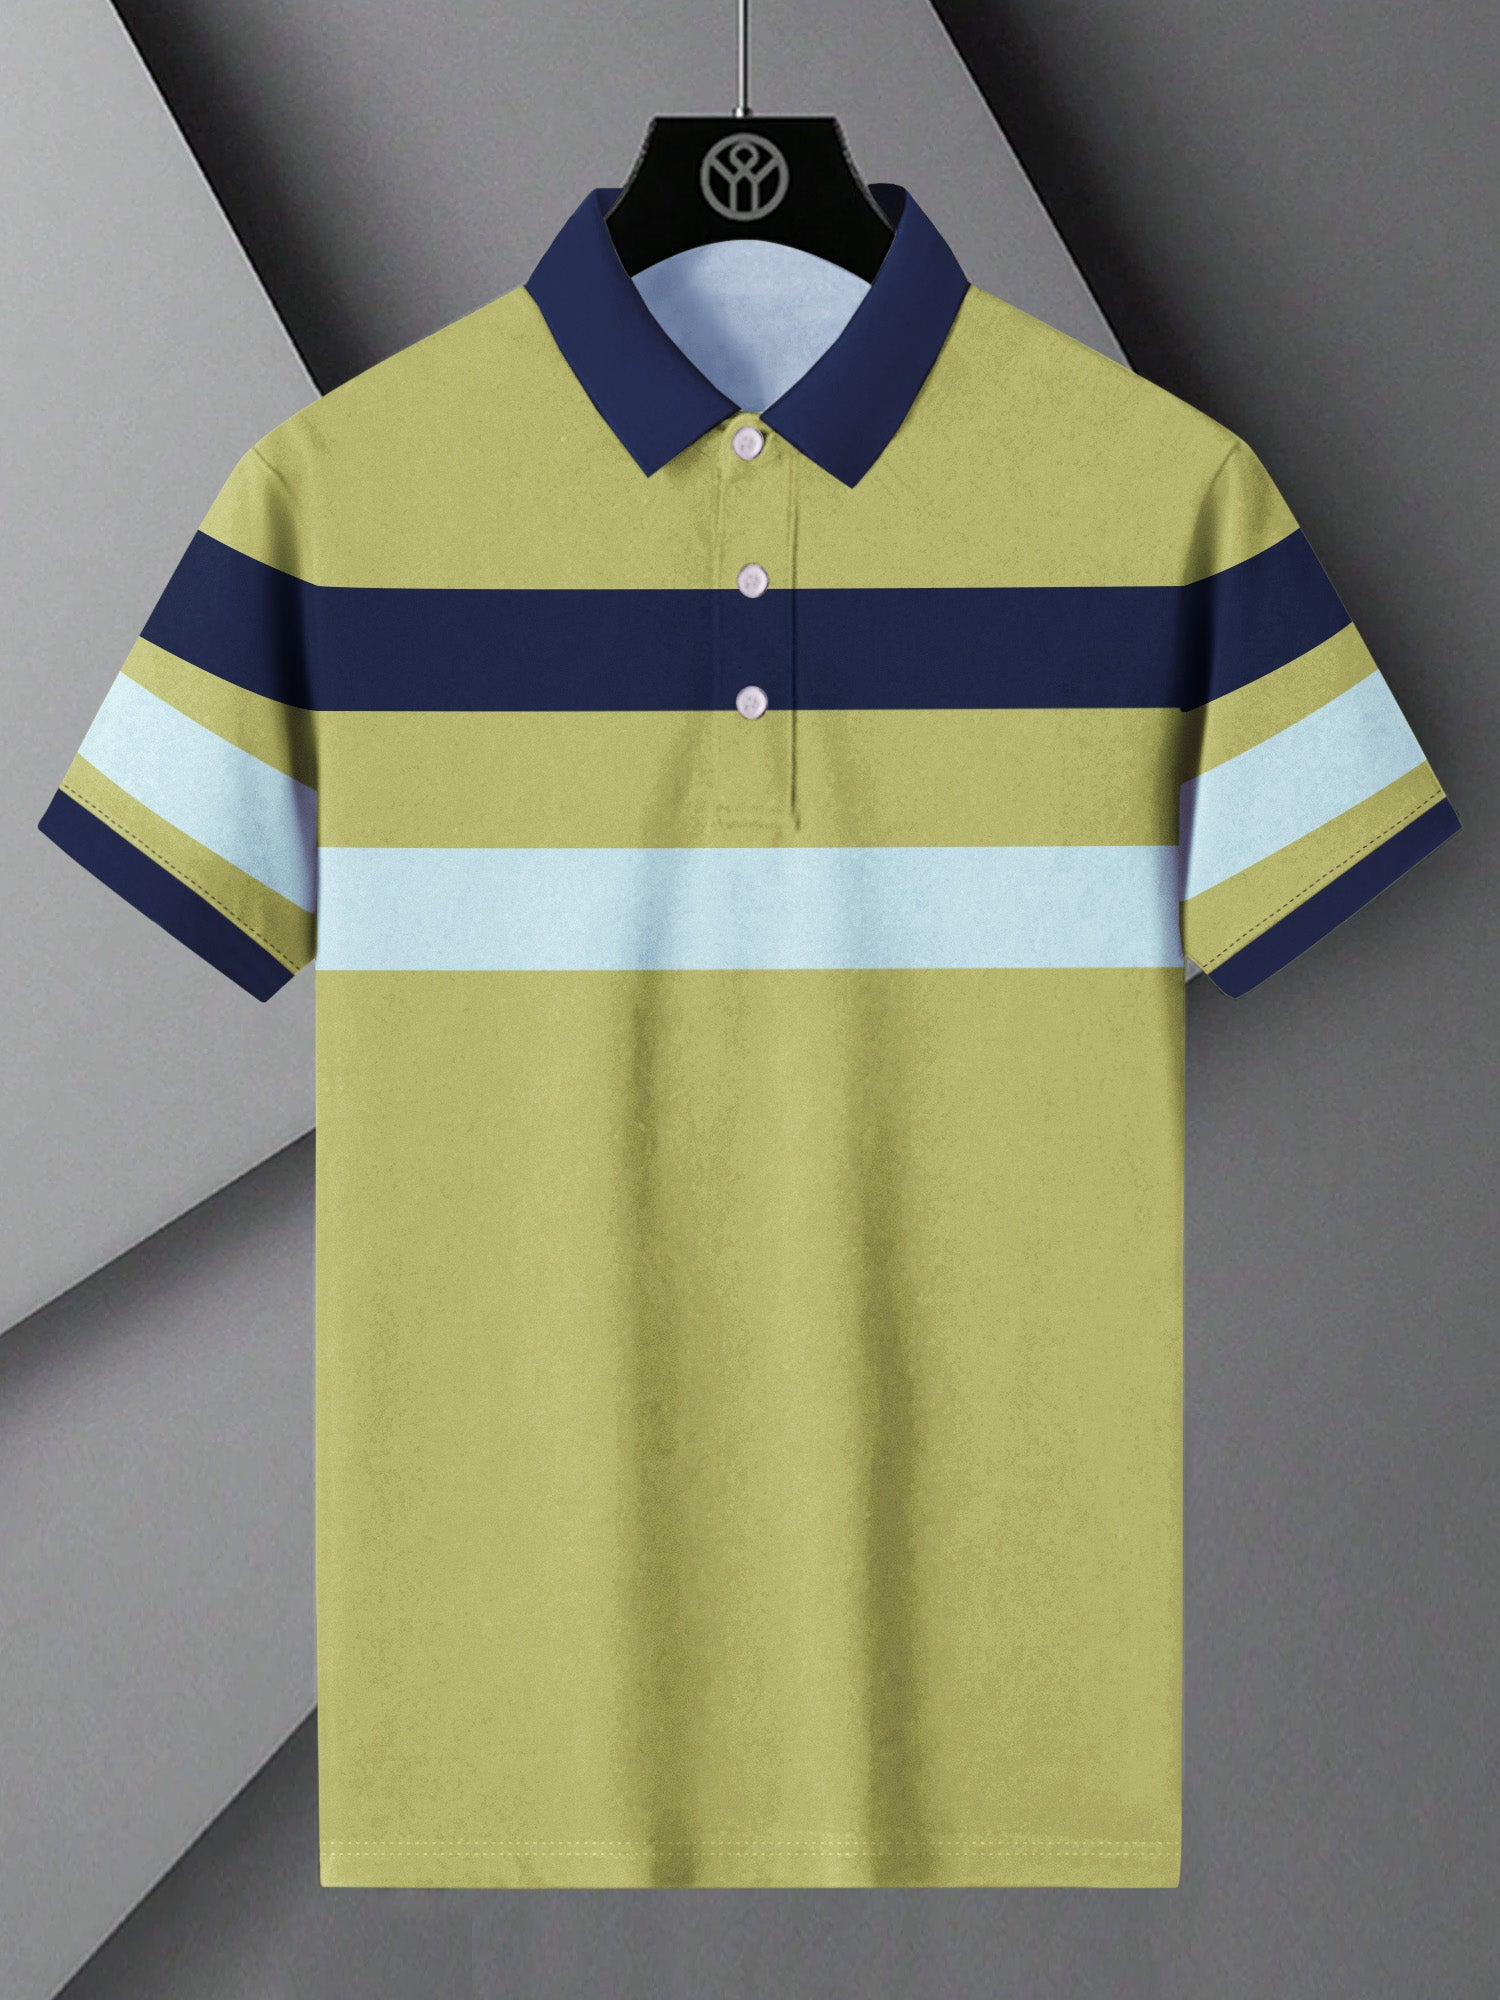 NXT Summer Polo Shirt For Men-Lime Green with Navy & Sky Stripe-BE772/BR13019